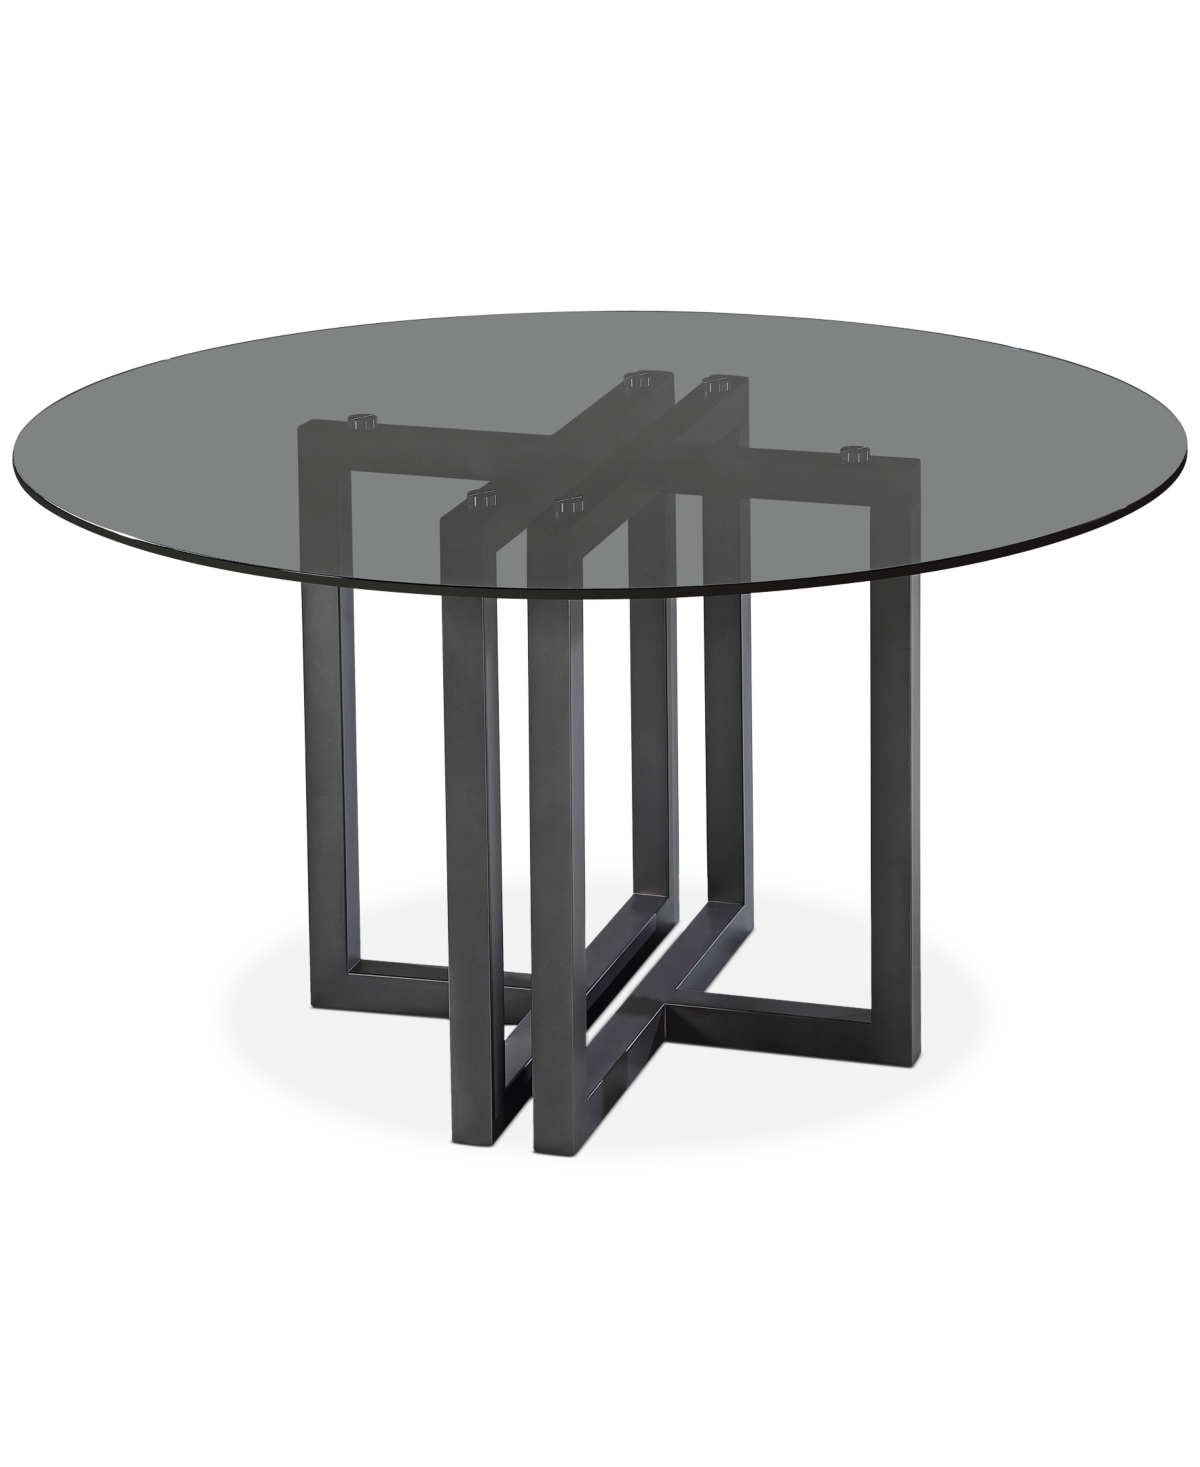 Furniture Emila 54" Round Glass Mix And Match Dining Table, Created For Macy's In Smoked Glass With Black Base